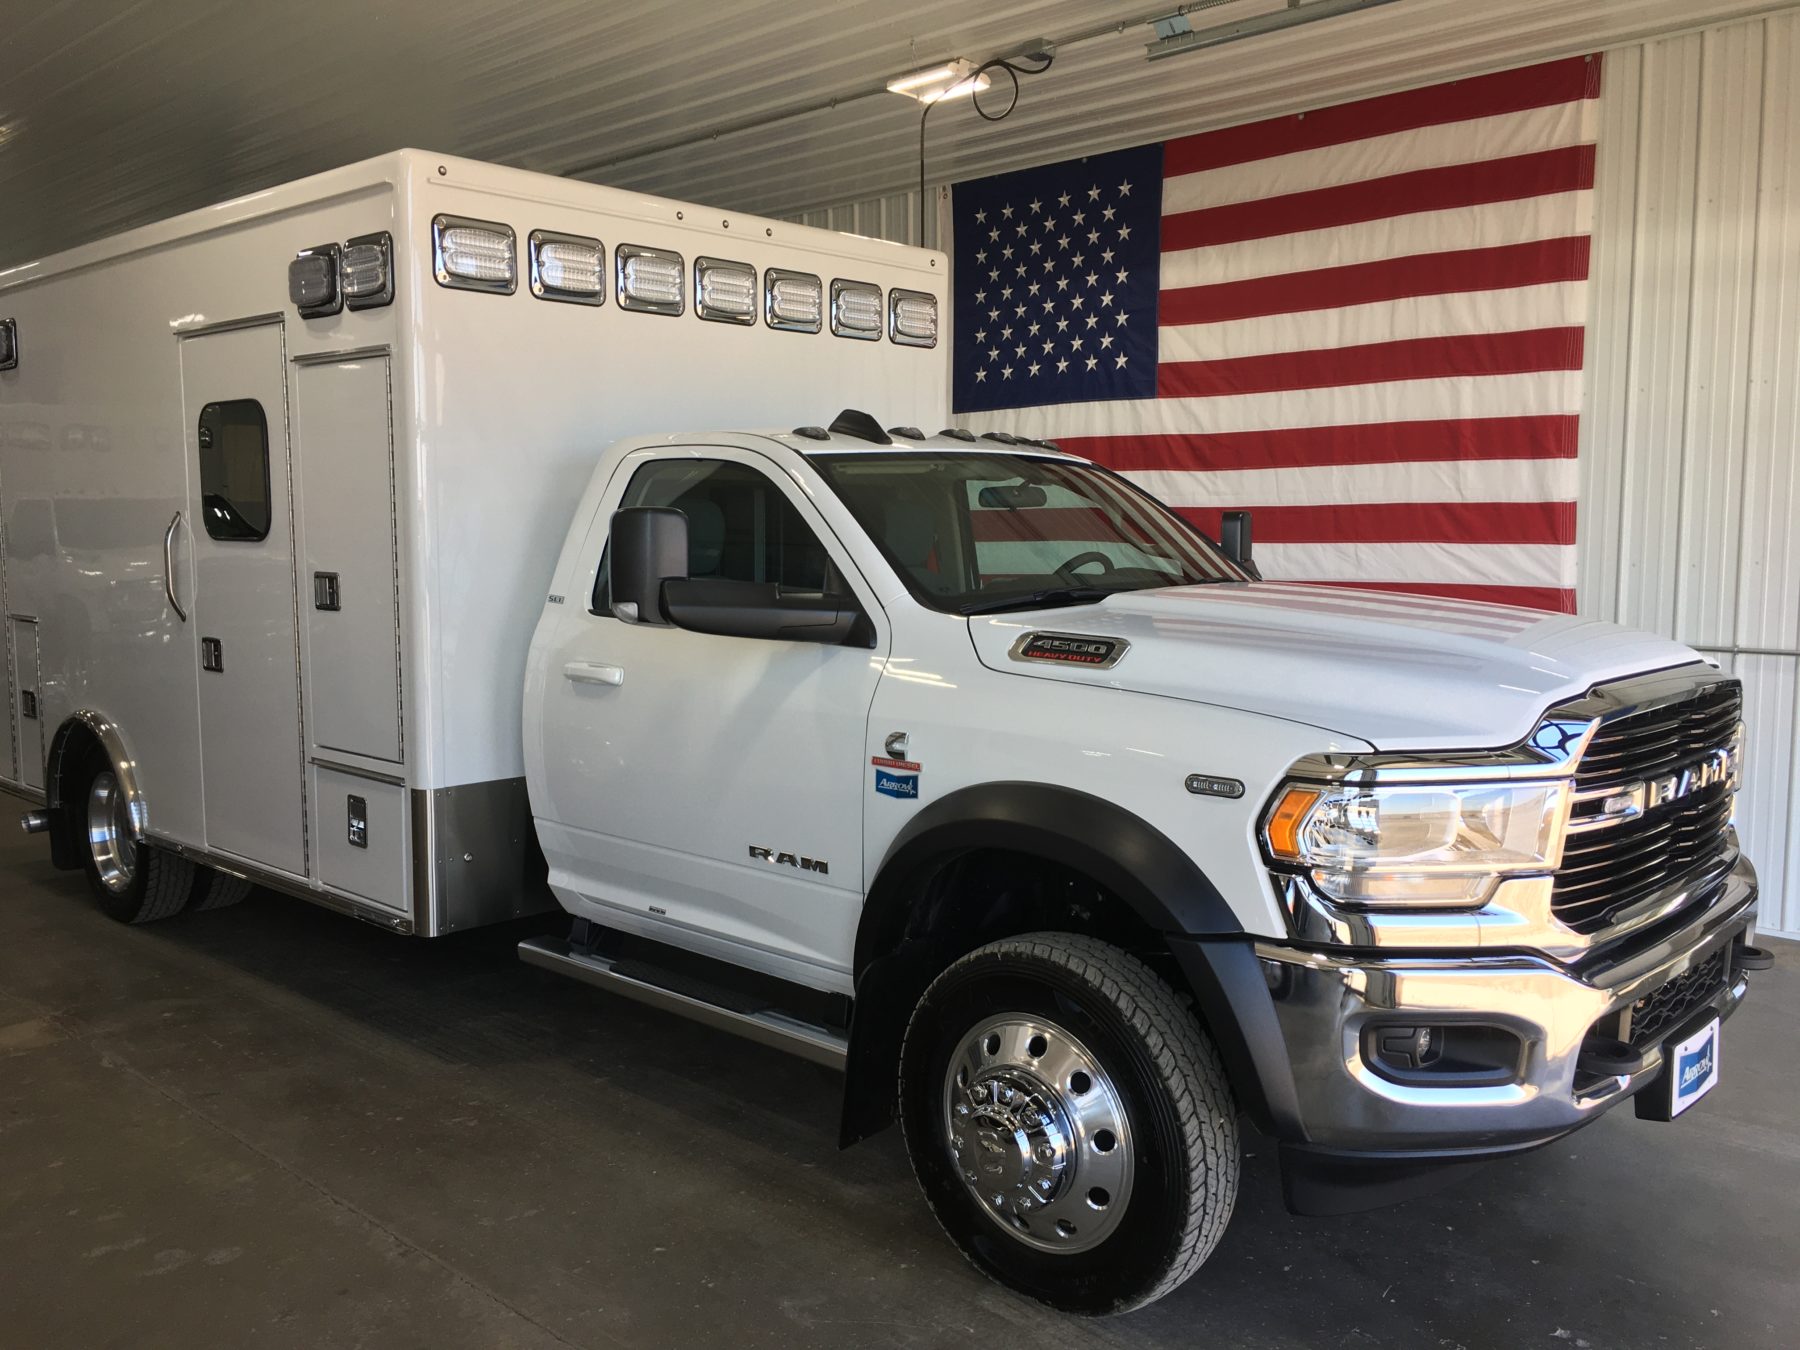 2020 Ram 4500 4x4 Heavy Duty Ambulance For Sale – Picture 11